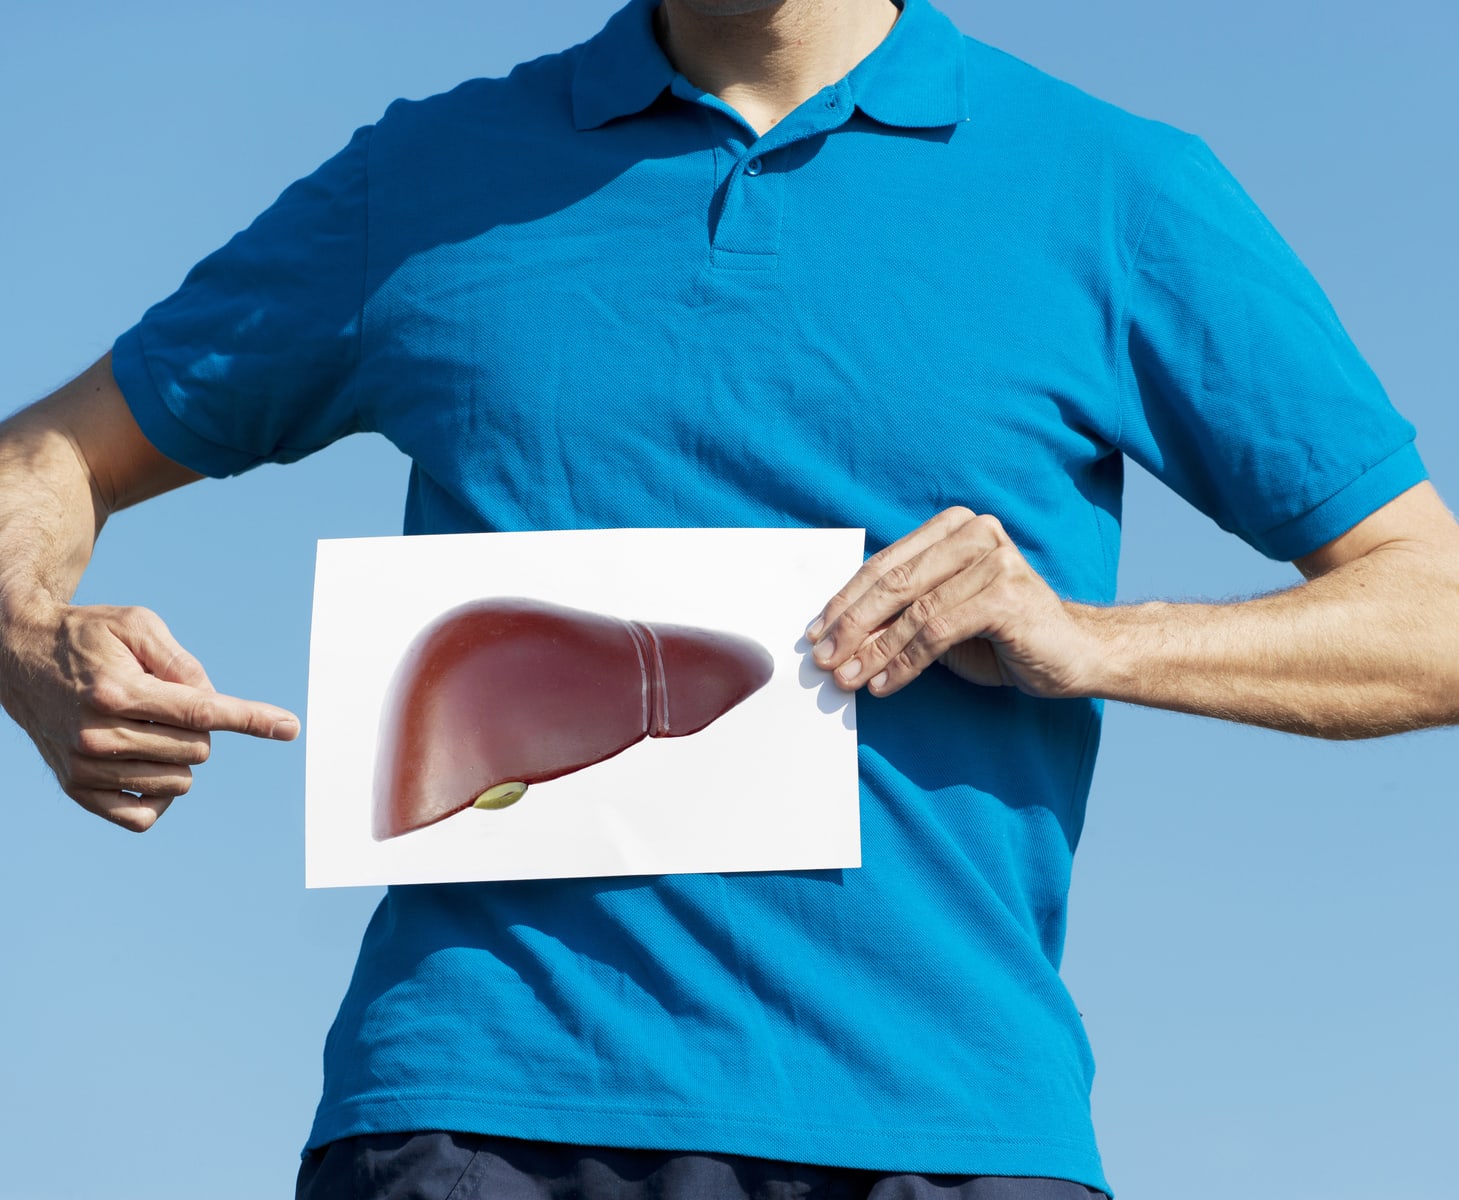 The-facts-on-fatty-liver-disease-iStock-174980367.jpg